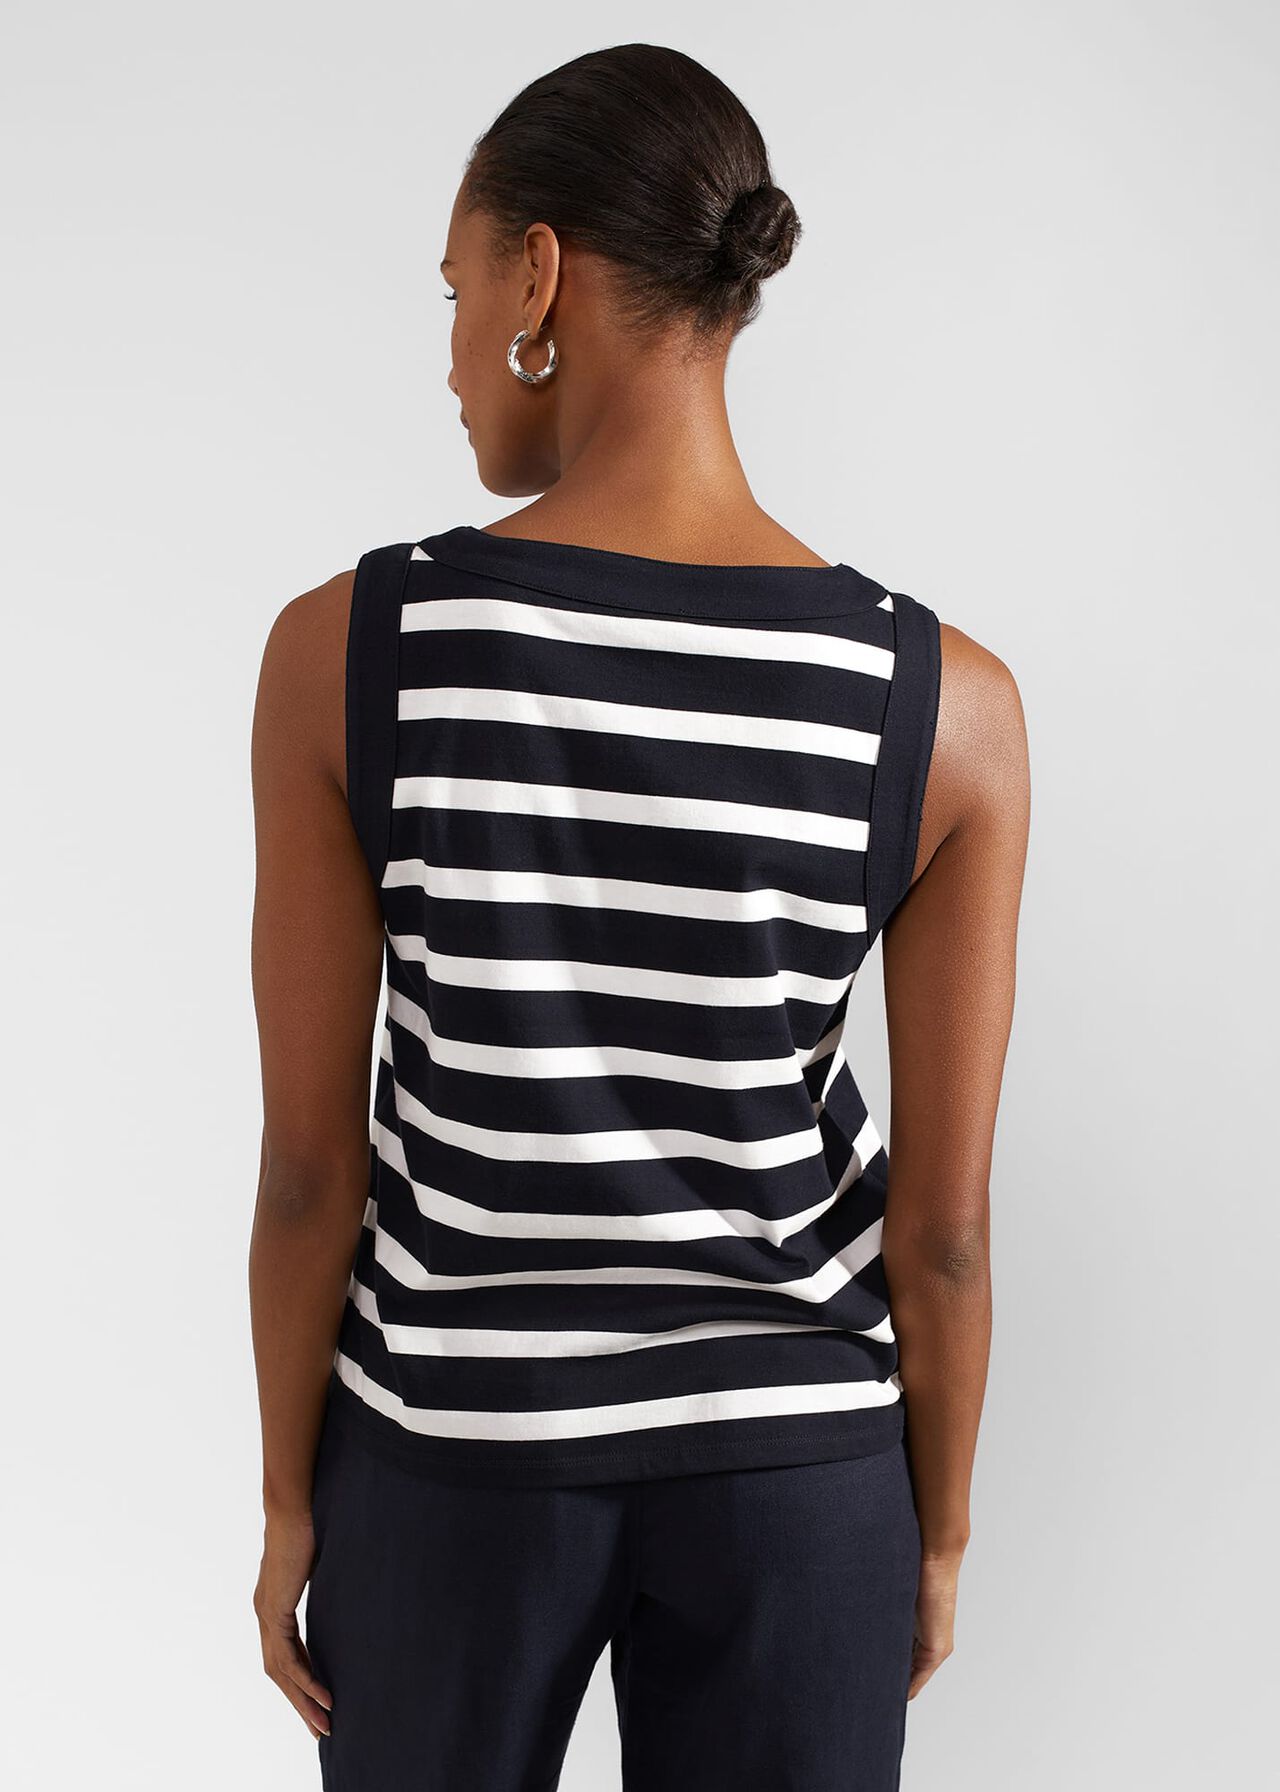 Maddy Cotton Striped Top, Navy Ivory, hi-res